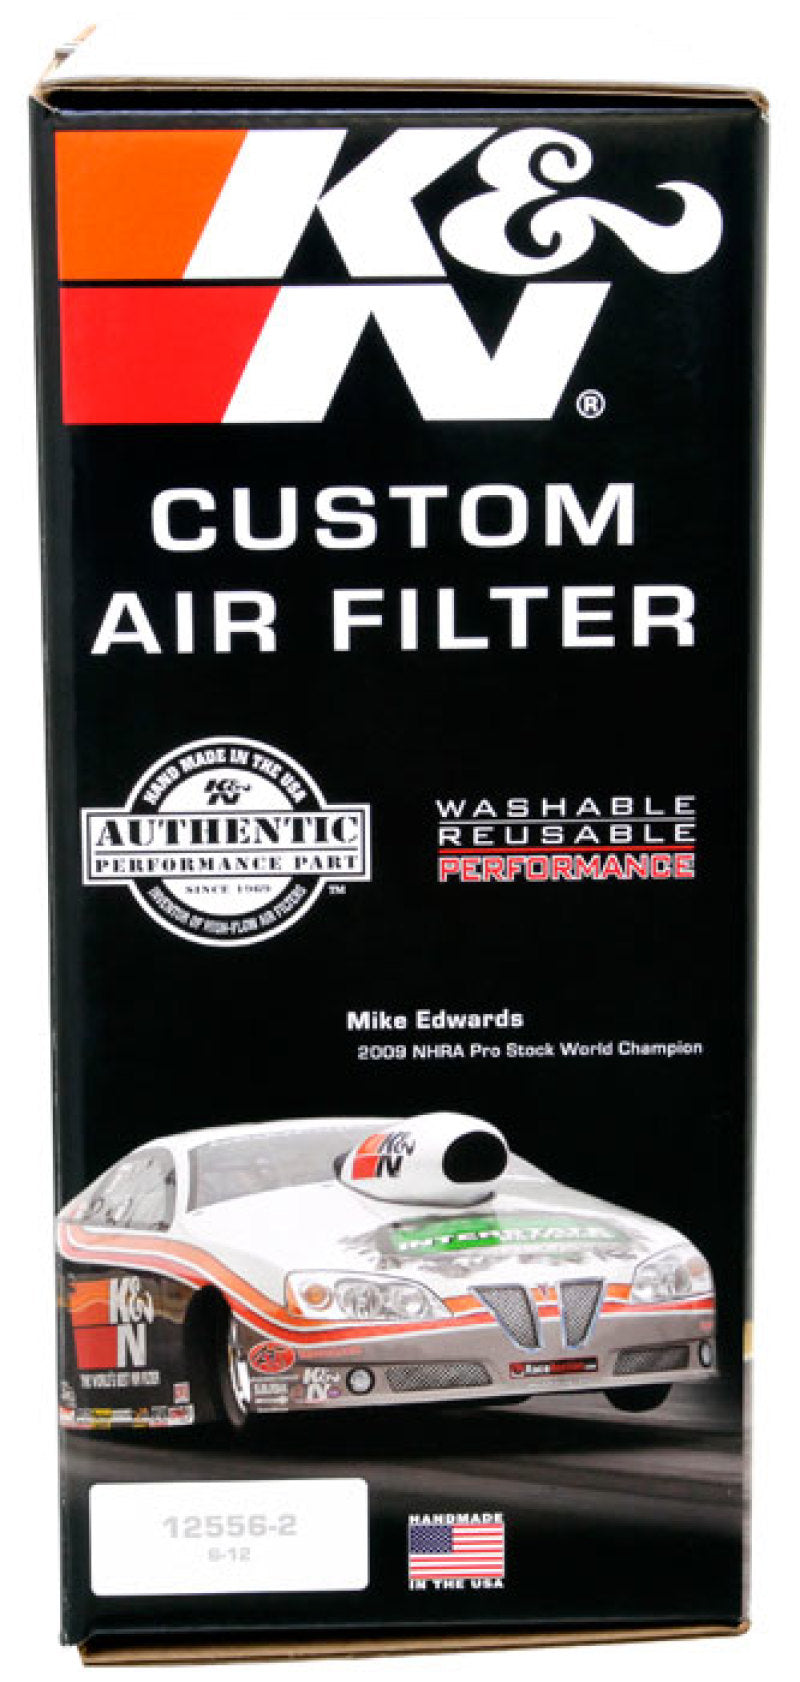 K&amp;N Round Air Filter Assembly 14in. ID / 4..12in. Height / 5.125in. Neck Flange / 7/8in. Drop Ba